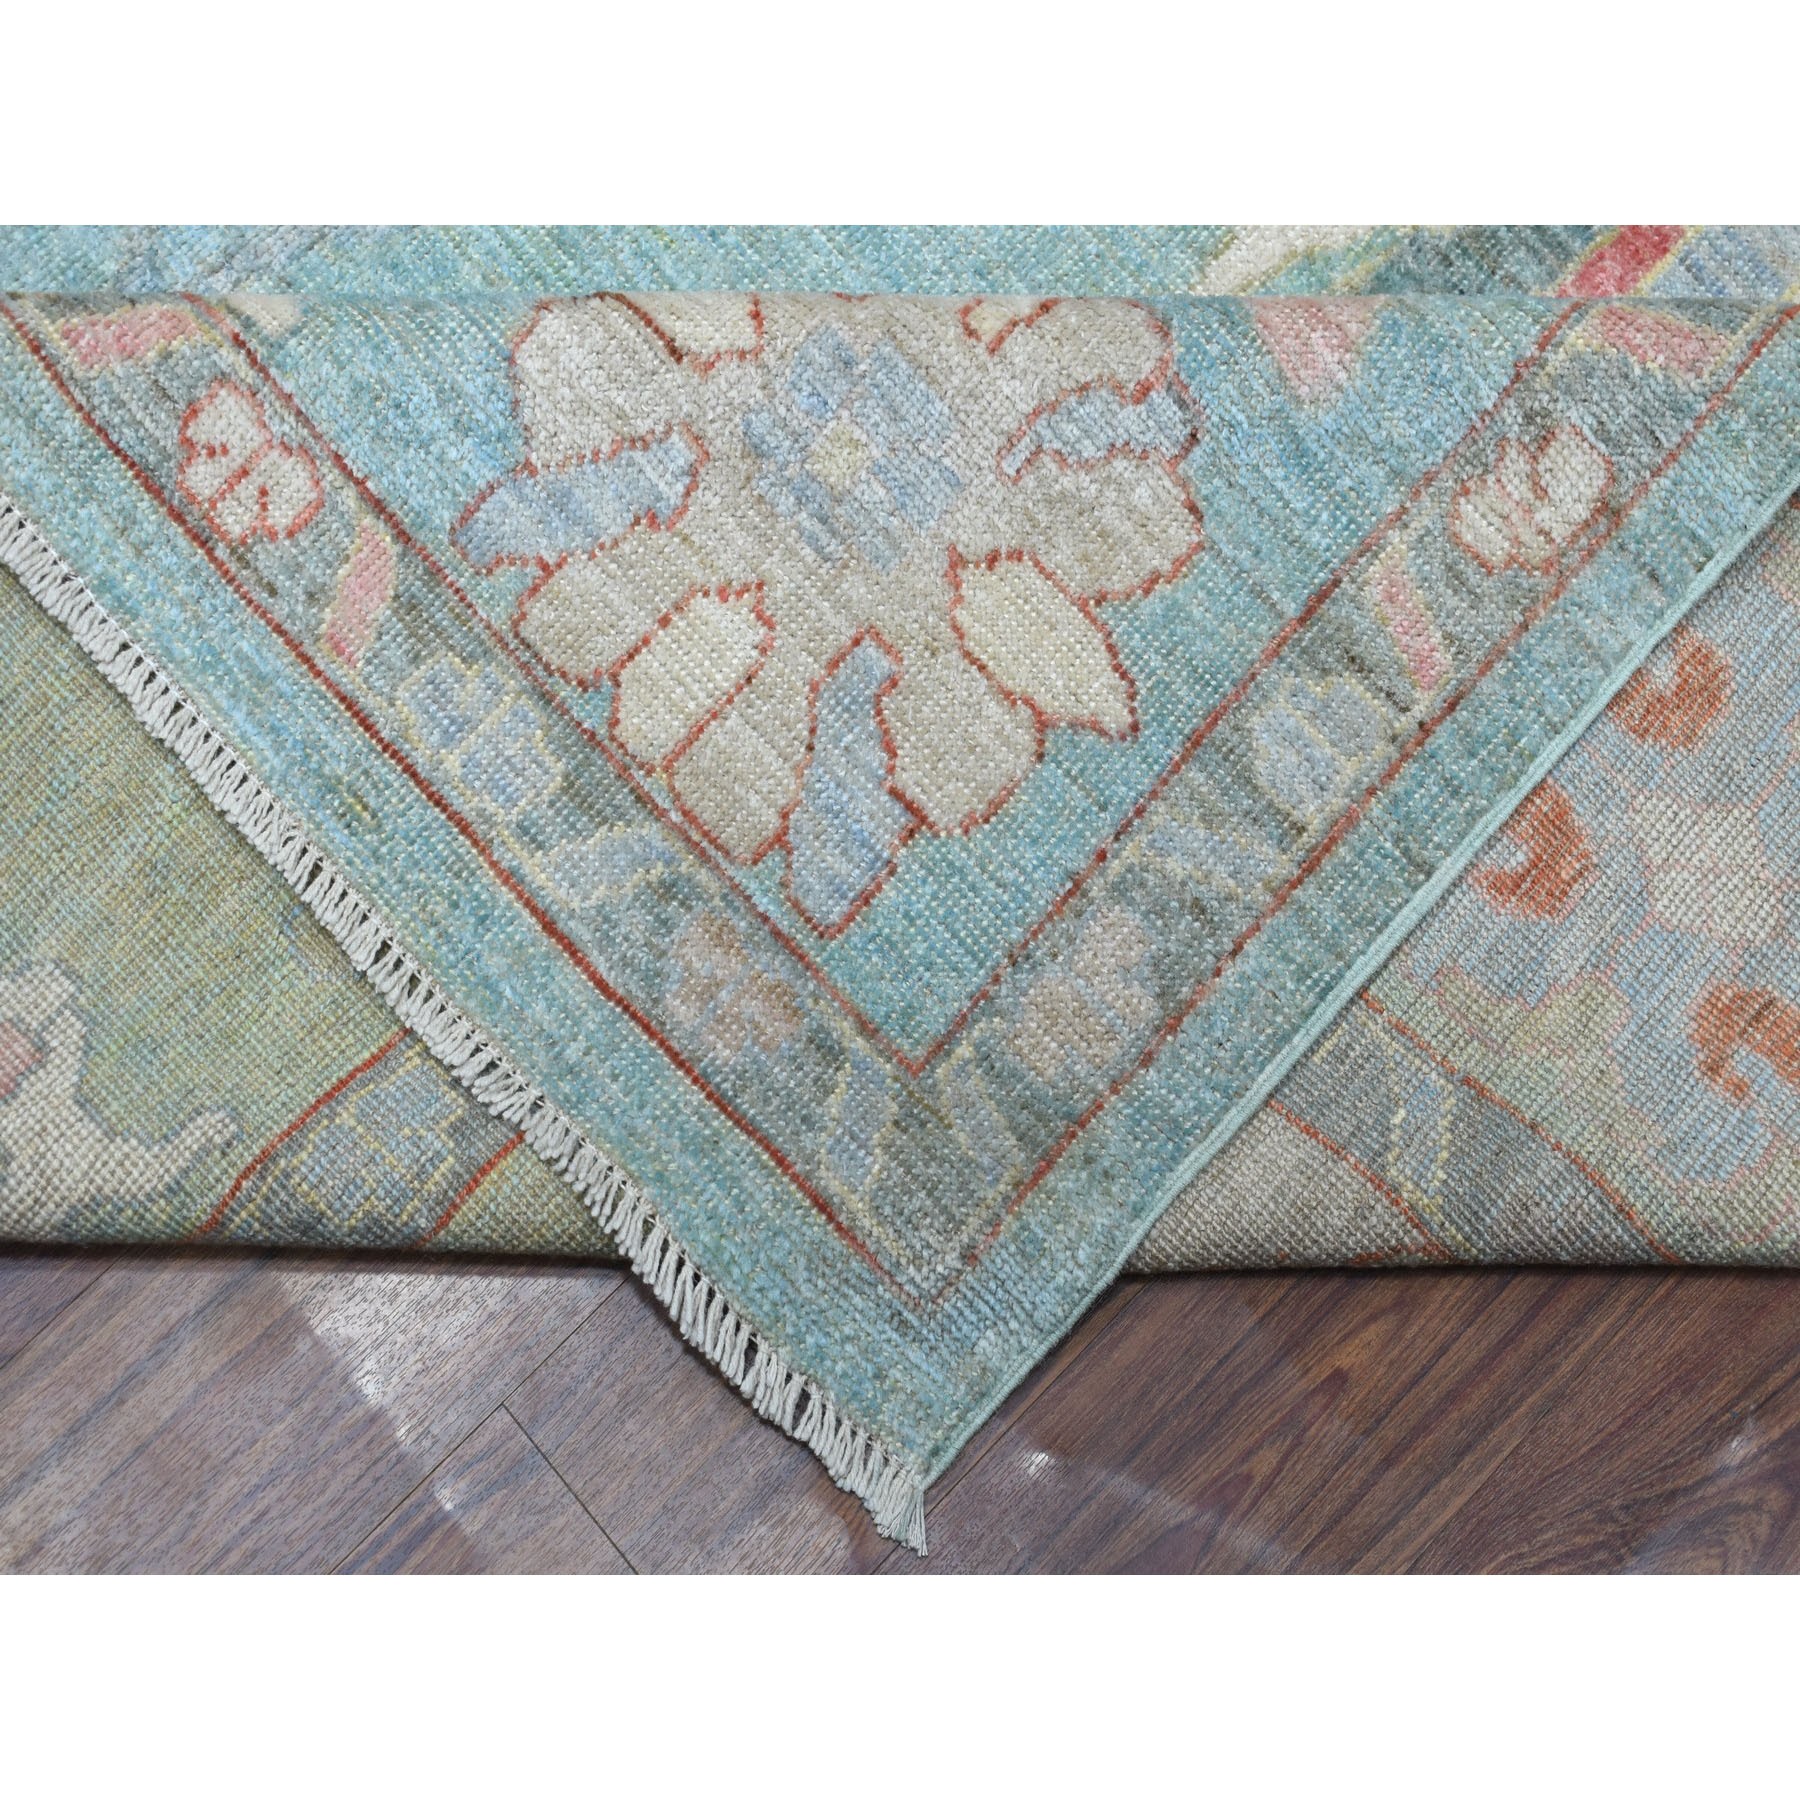 10-x13-9  Teal Blue Angora Oushak Soft Velvety Wool Hand Knotted Oriental Rug 